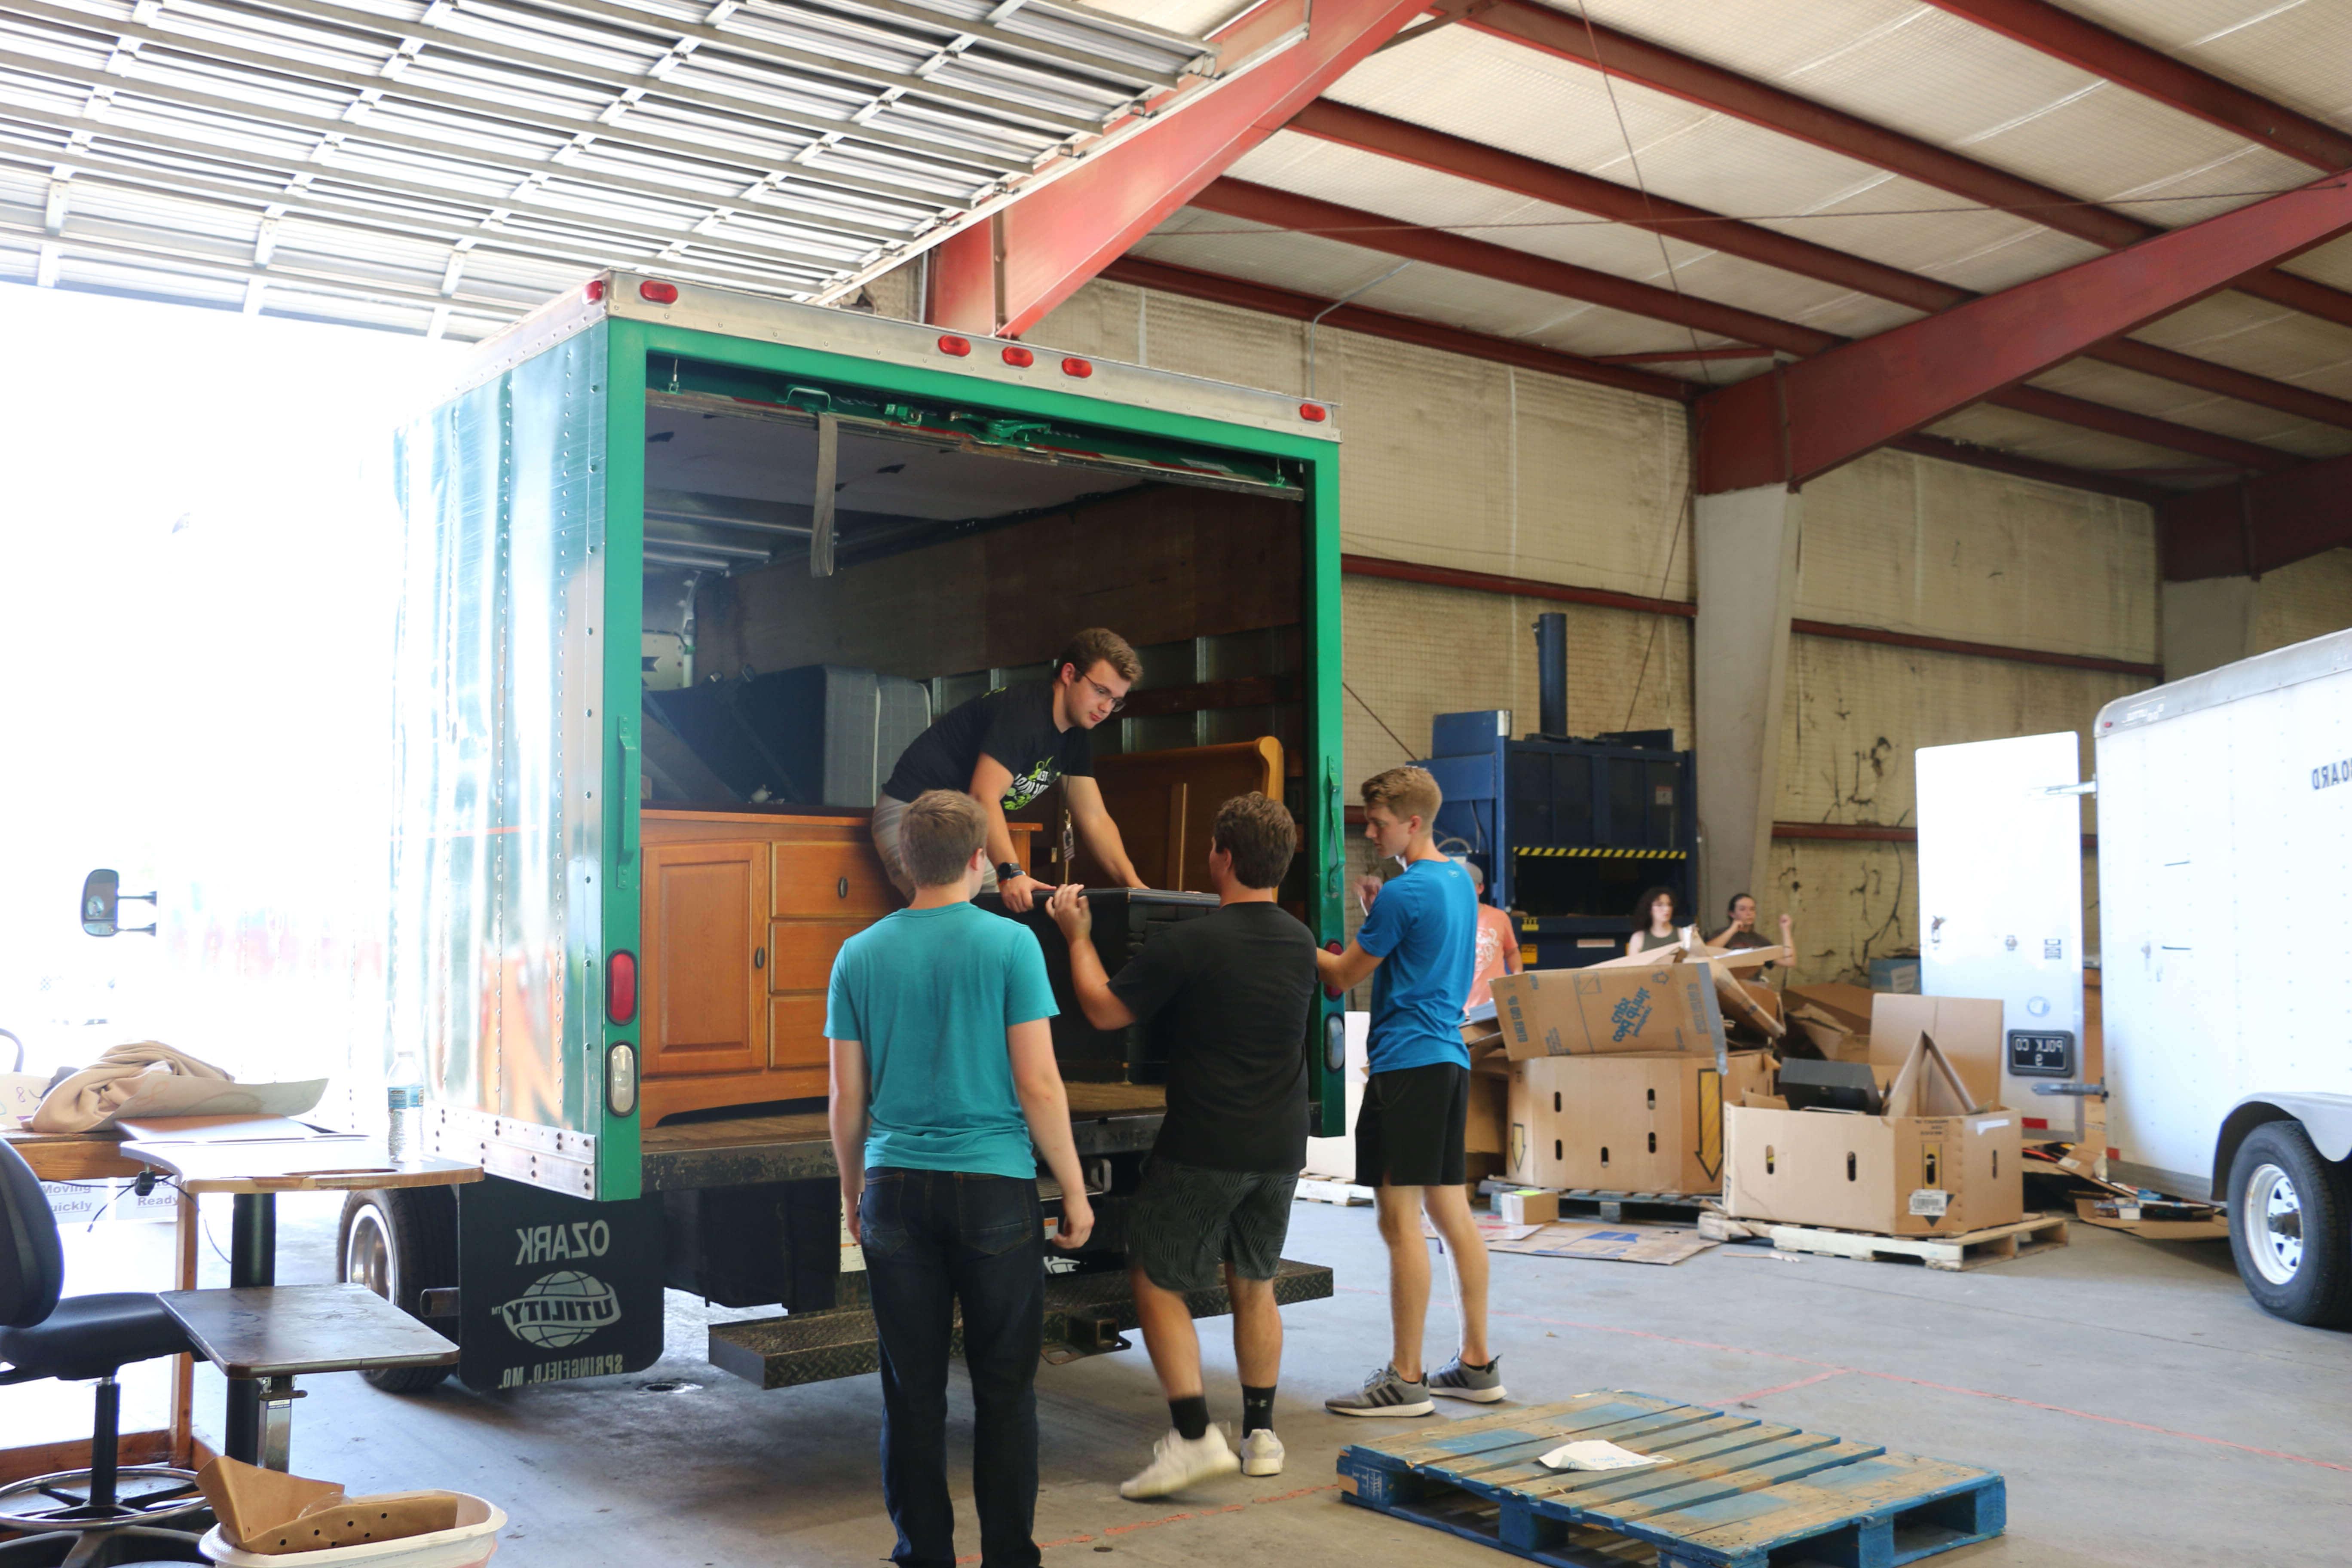 students serve by unloading trailer of donated furniture in warehouse